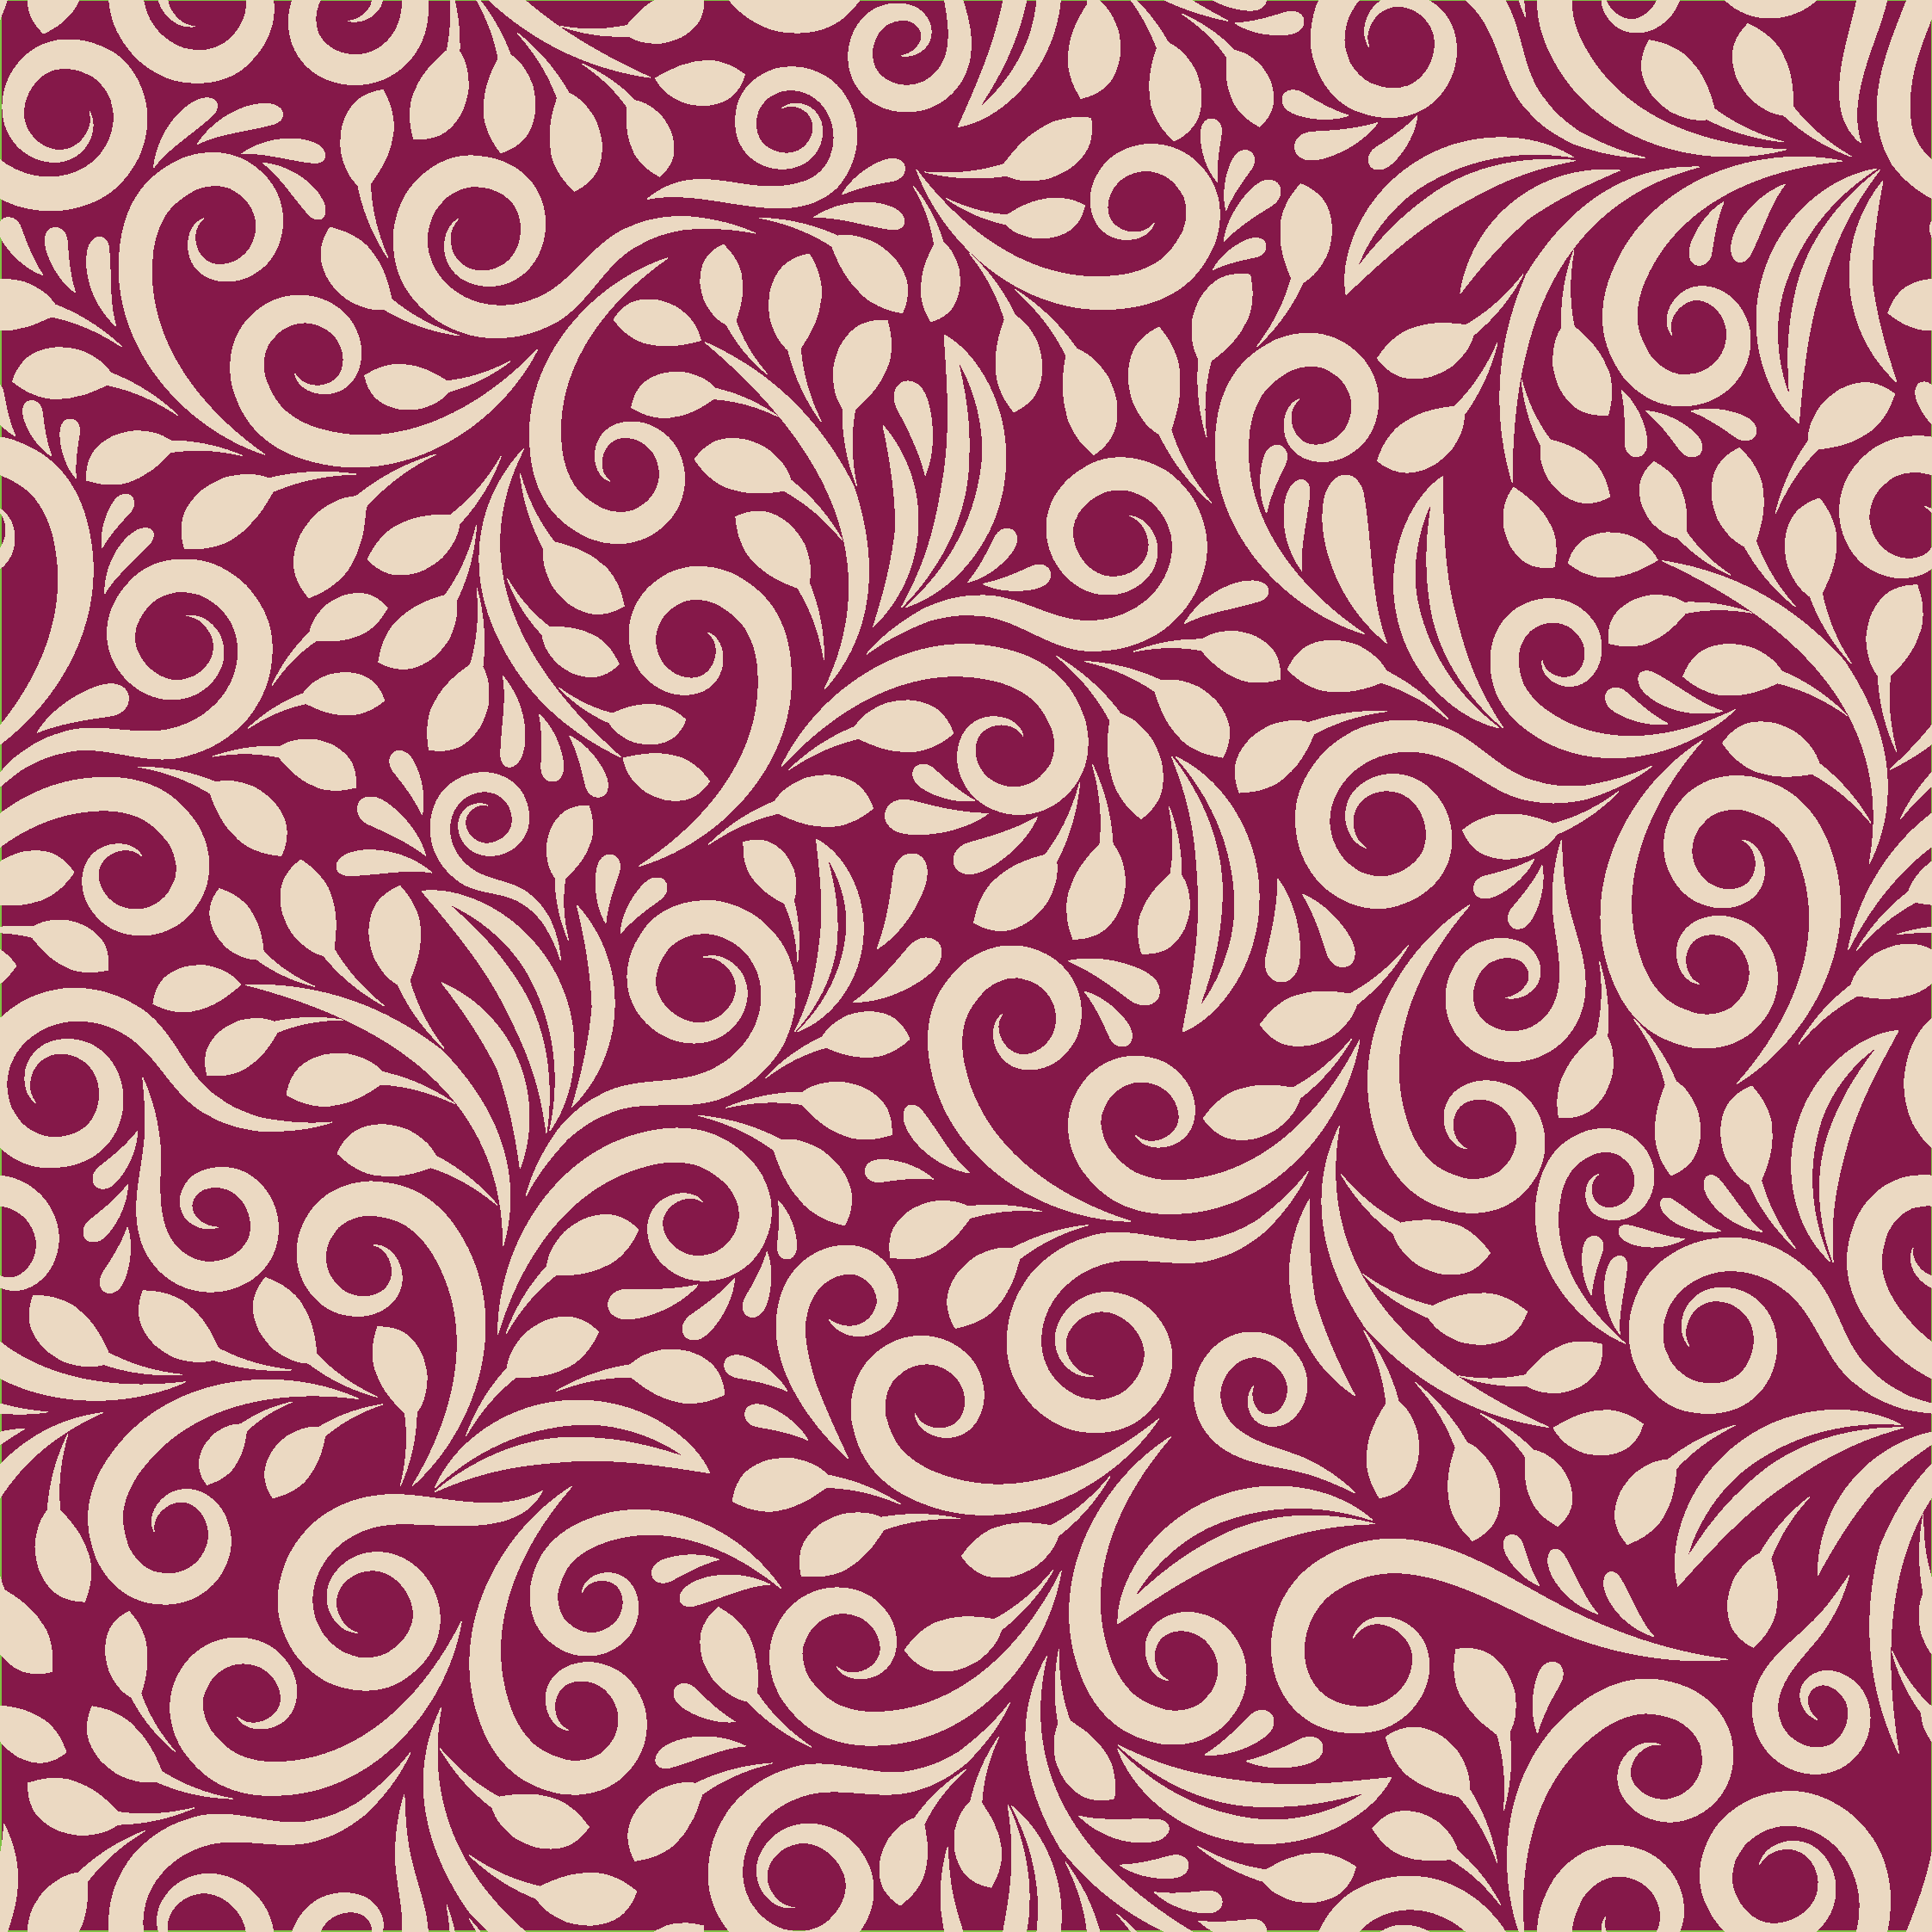 floral vector 183